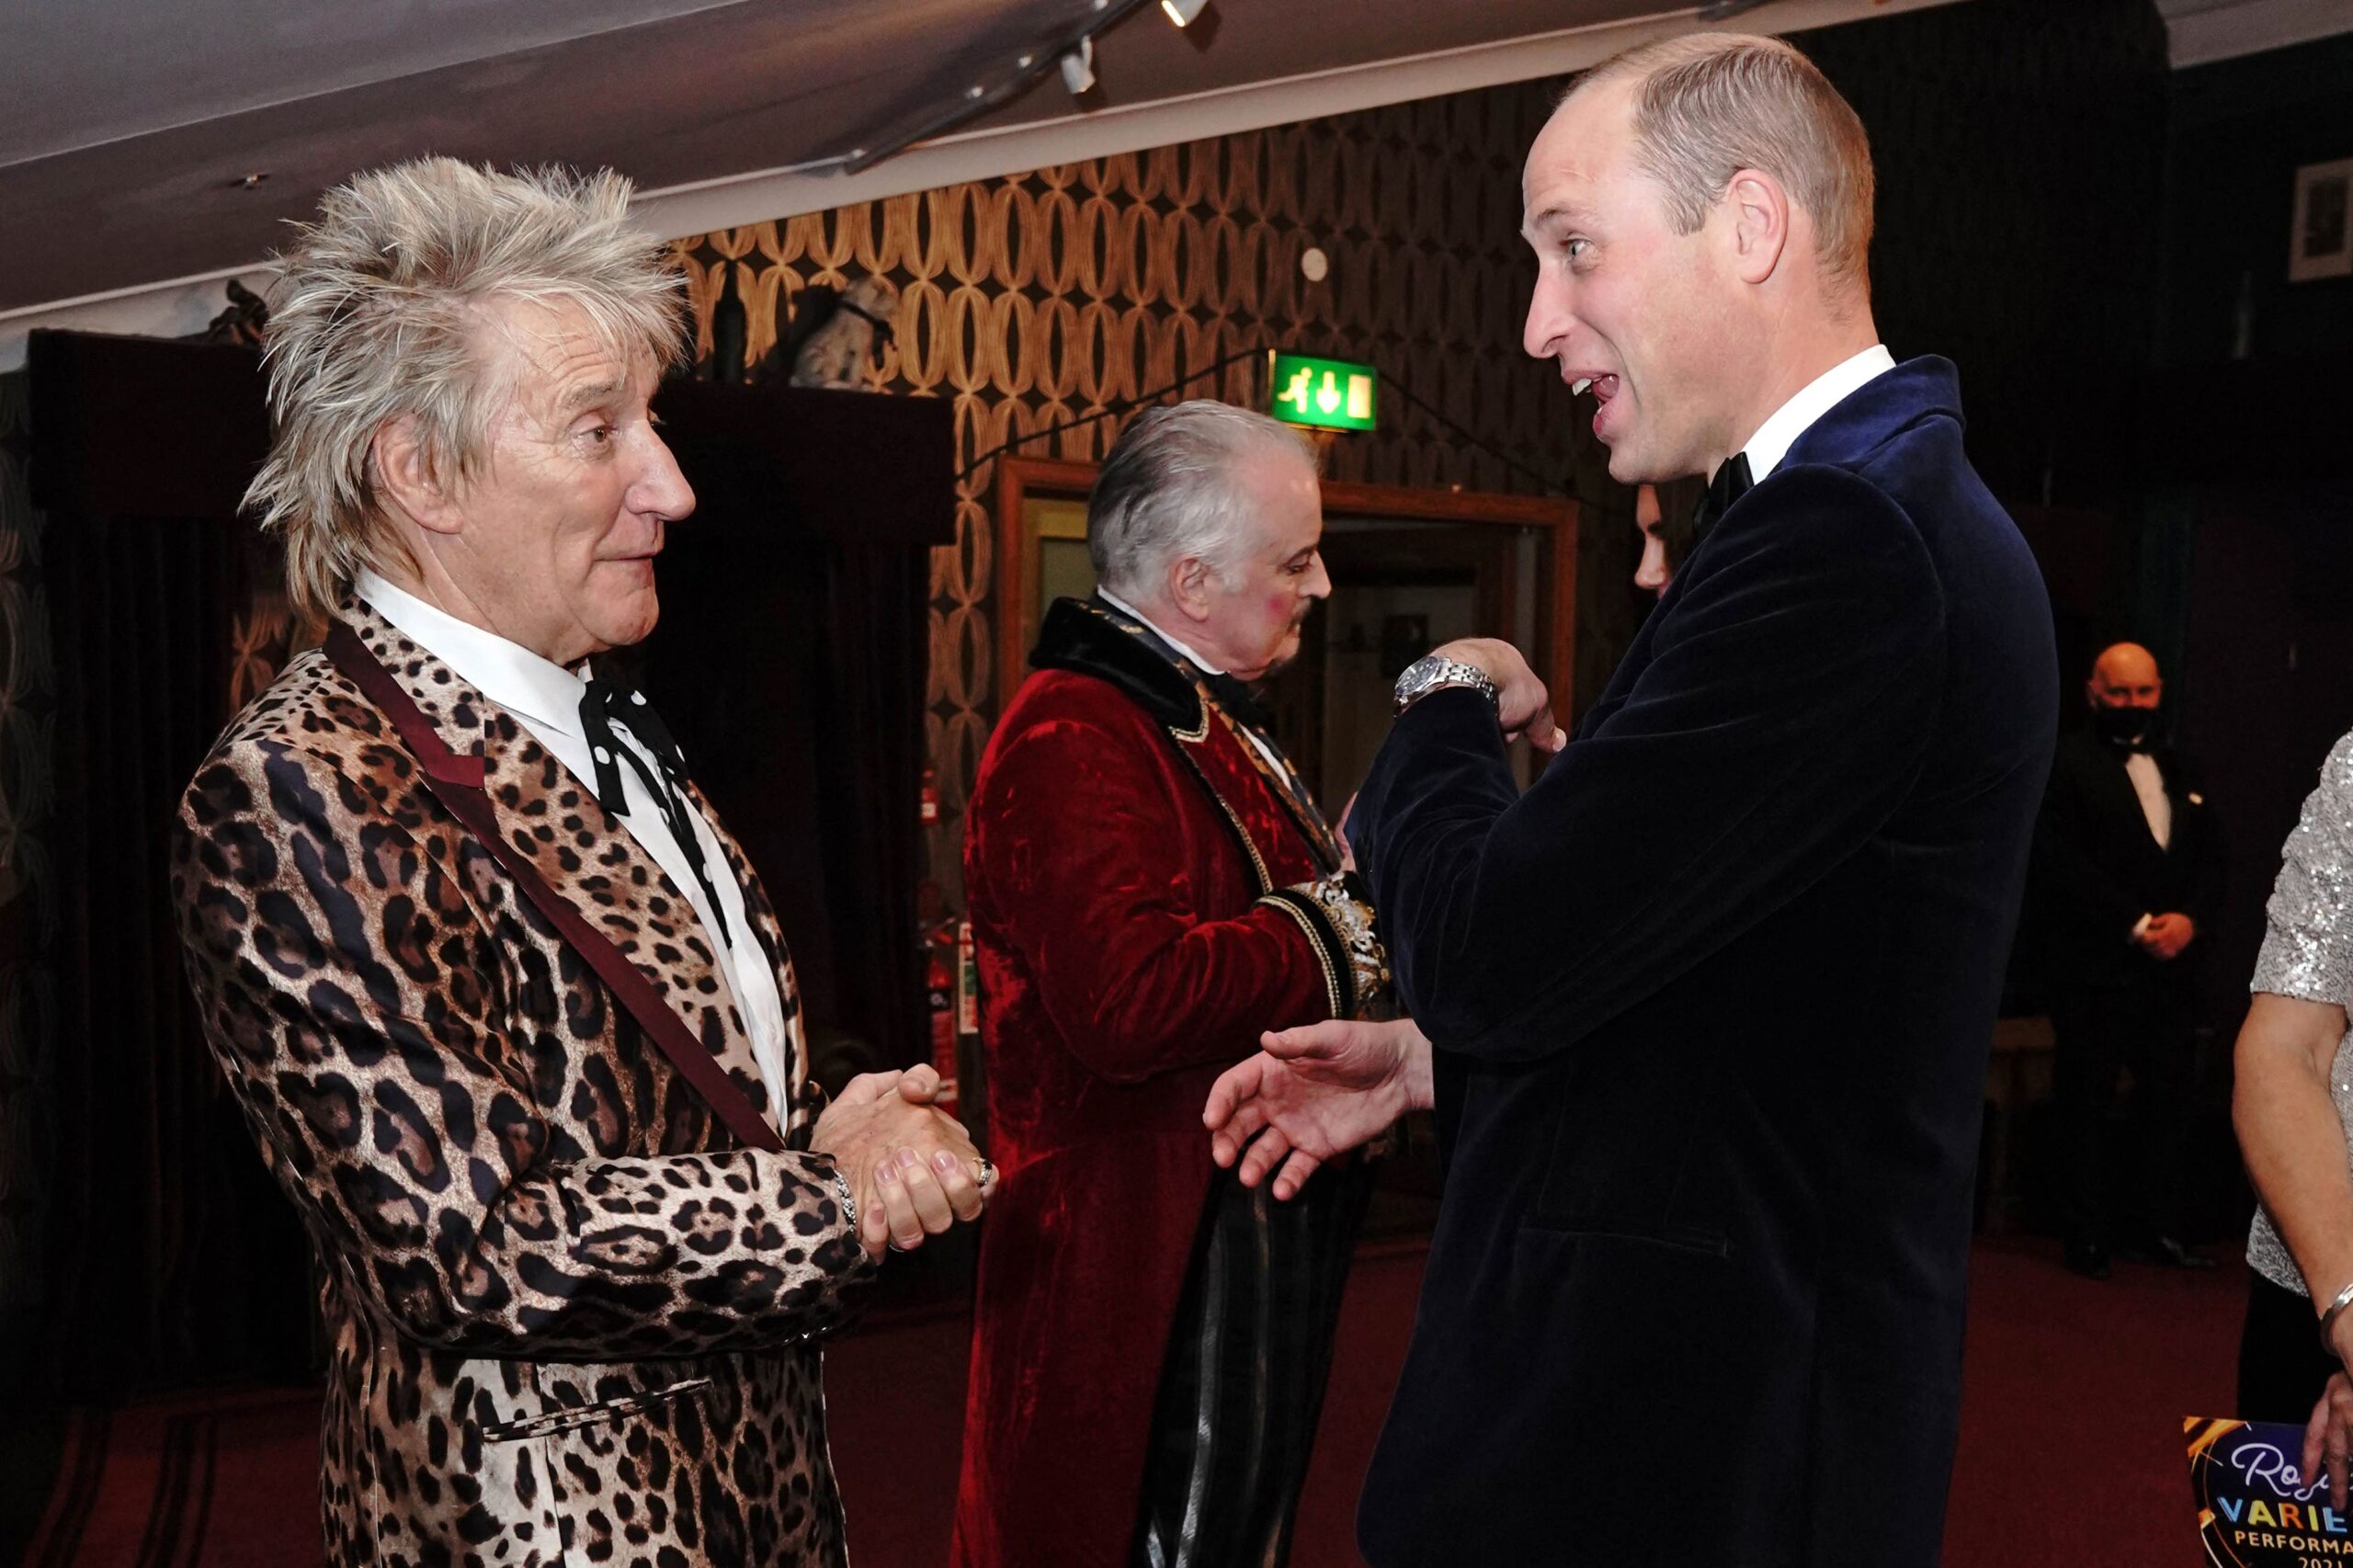 prince-william-and-rod-stewart-had-a-royal-outfit-battle